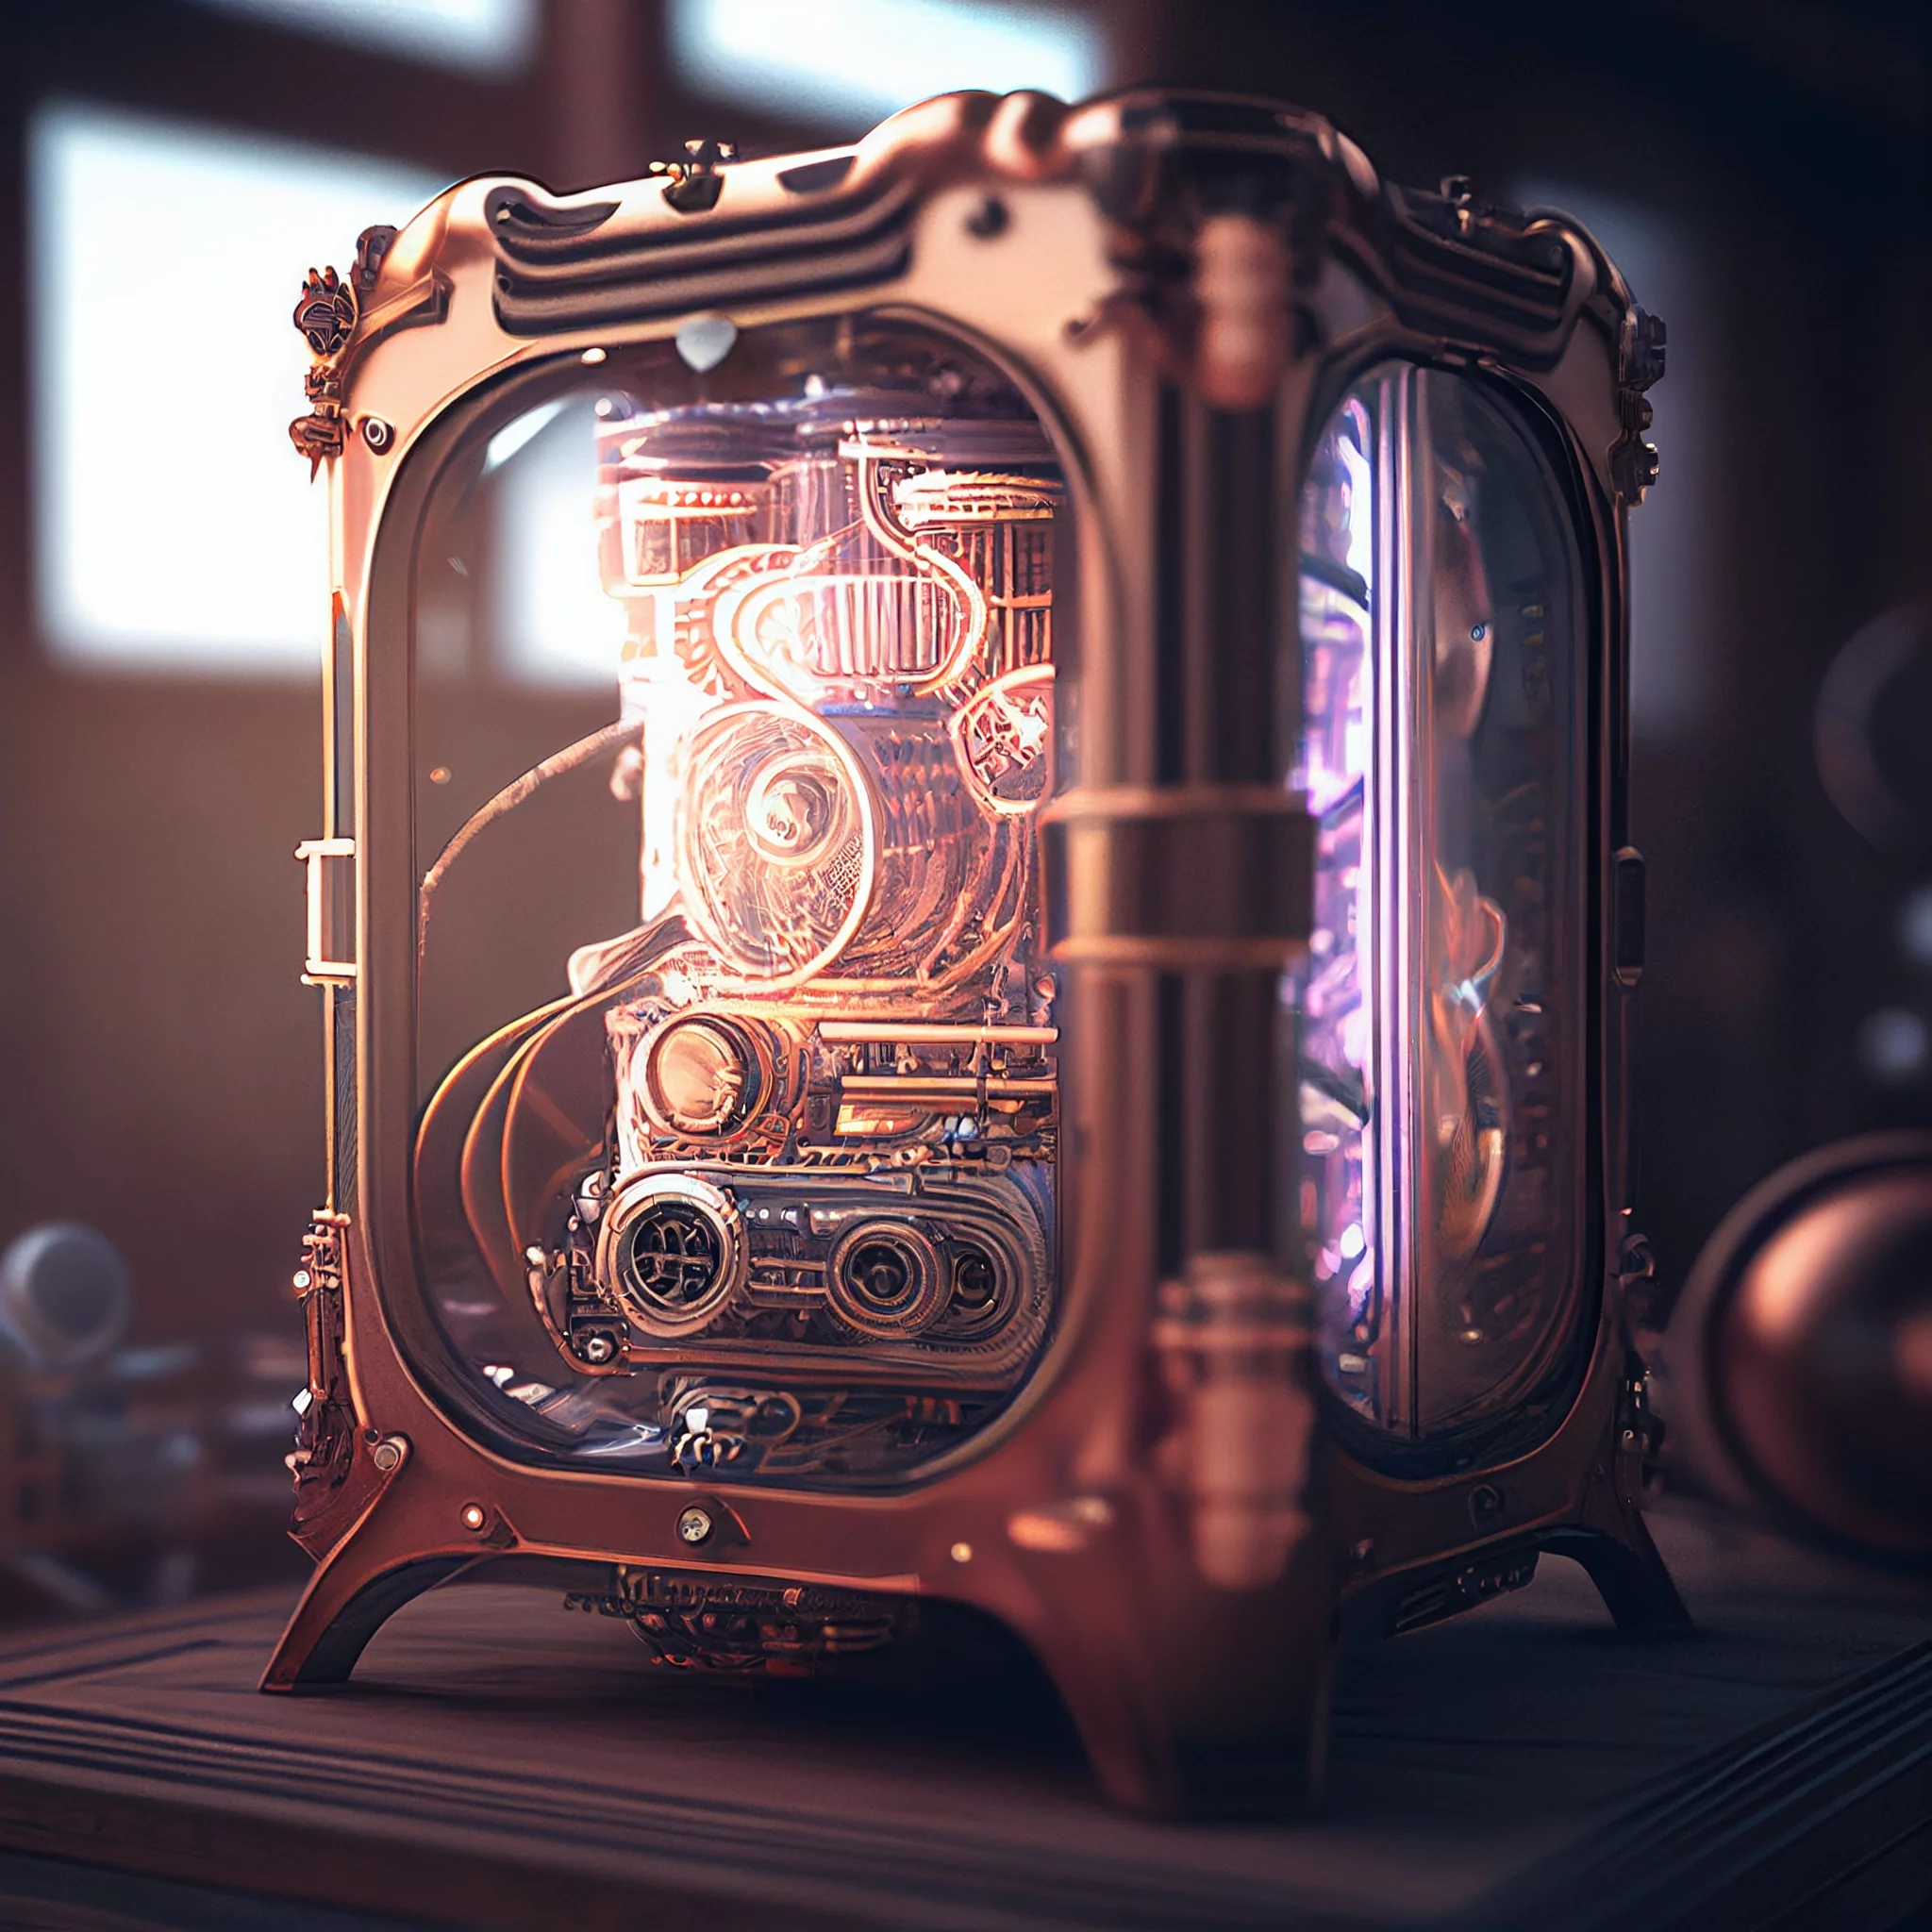 Steampunk gaming PC 16mm lens